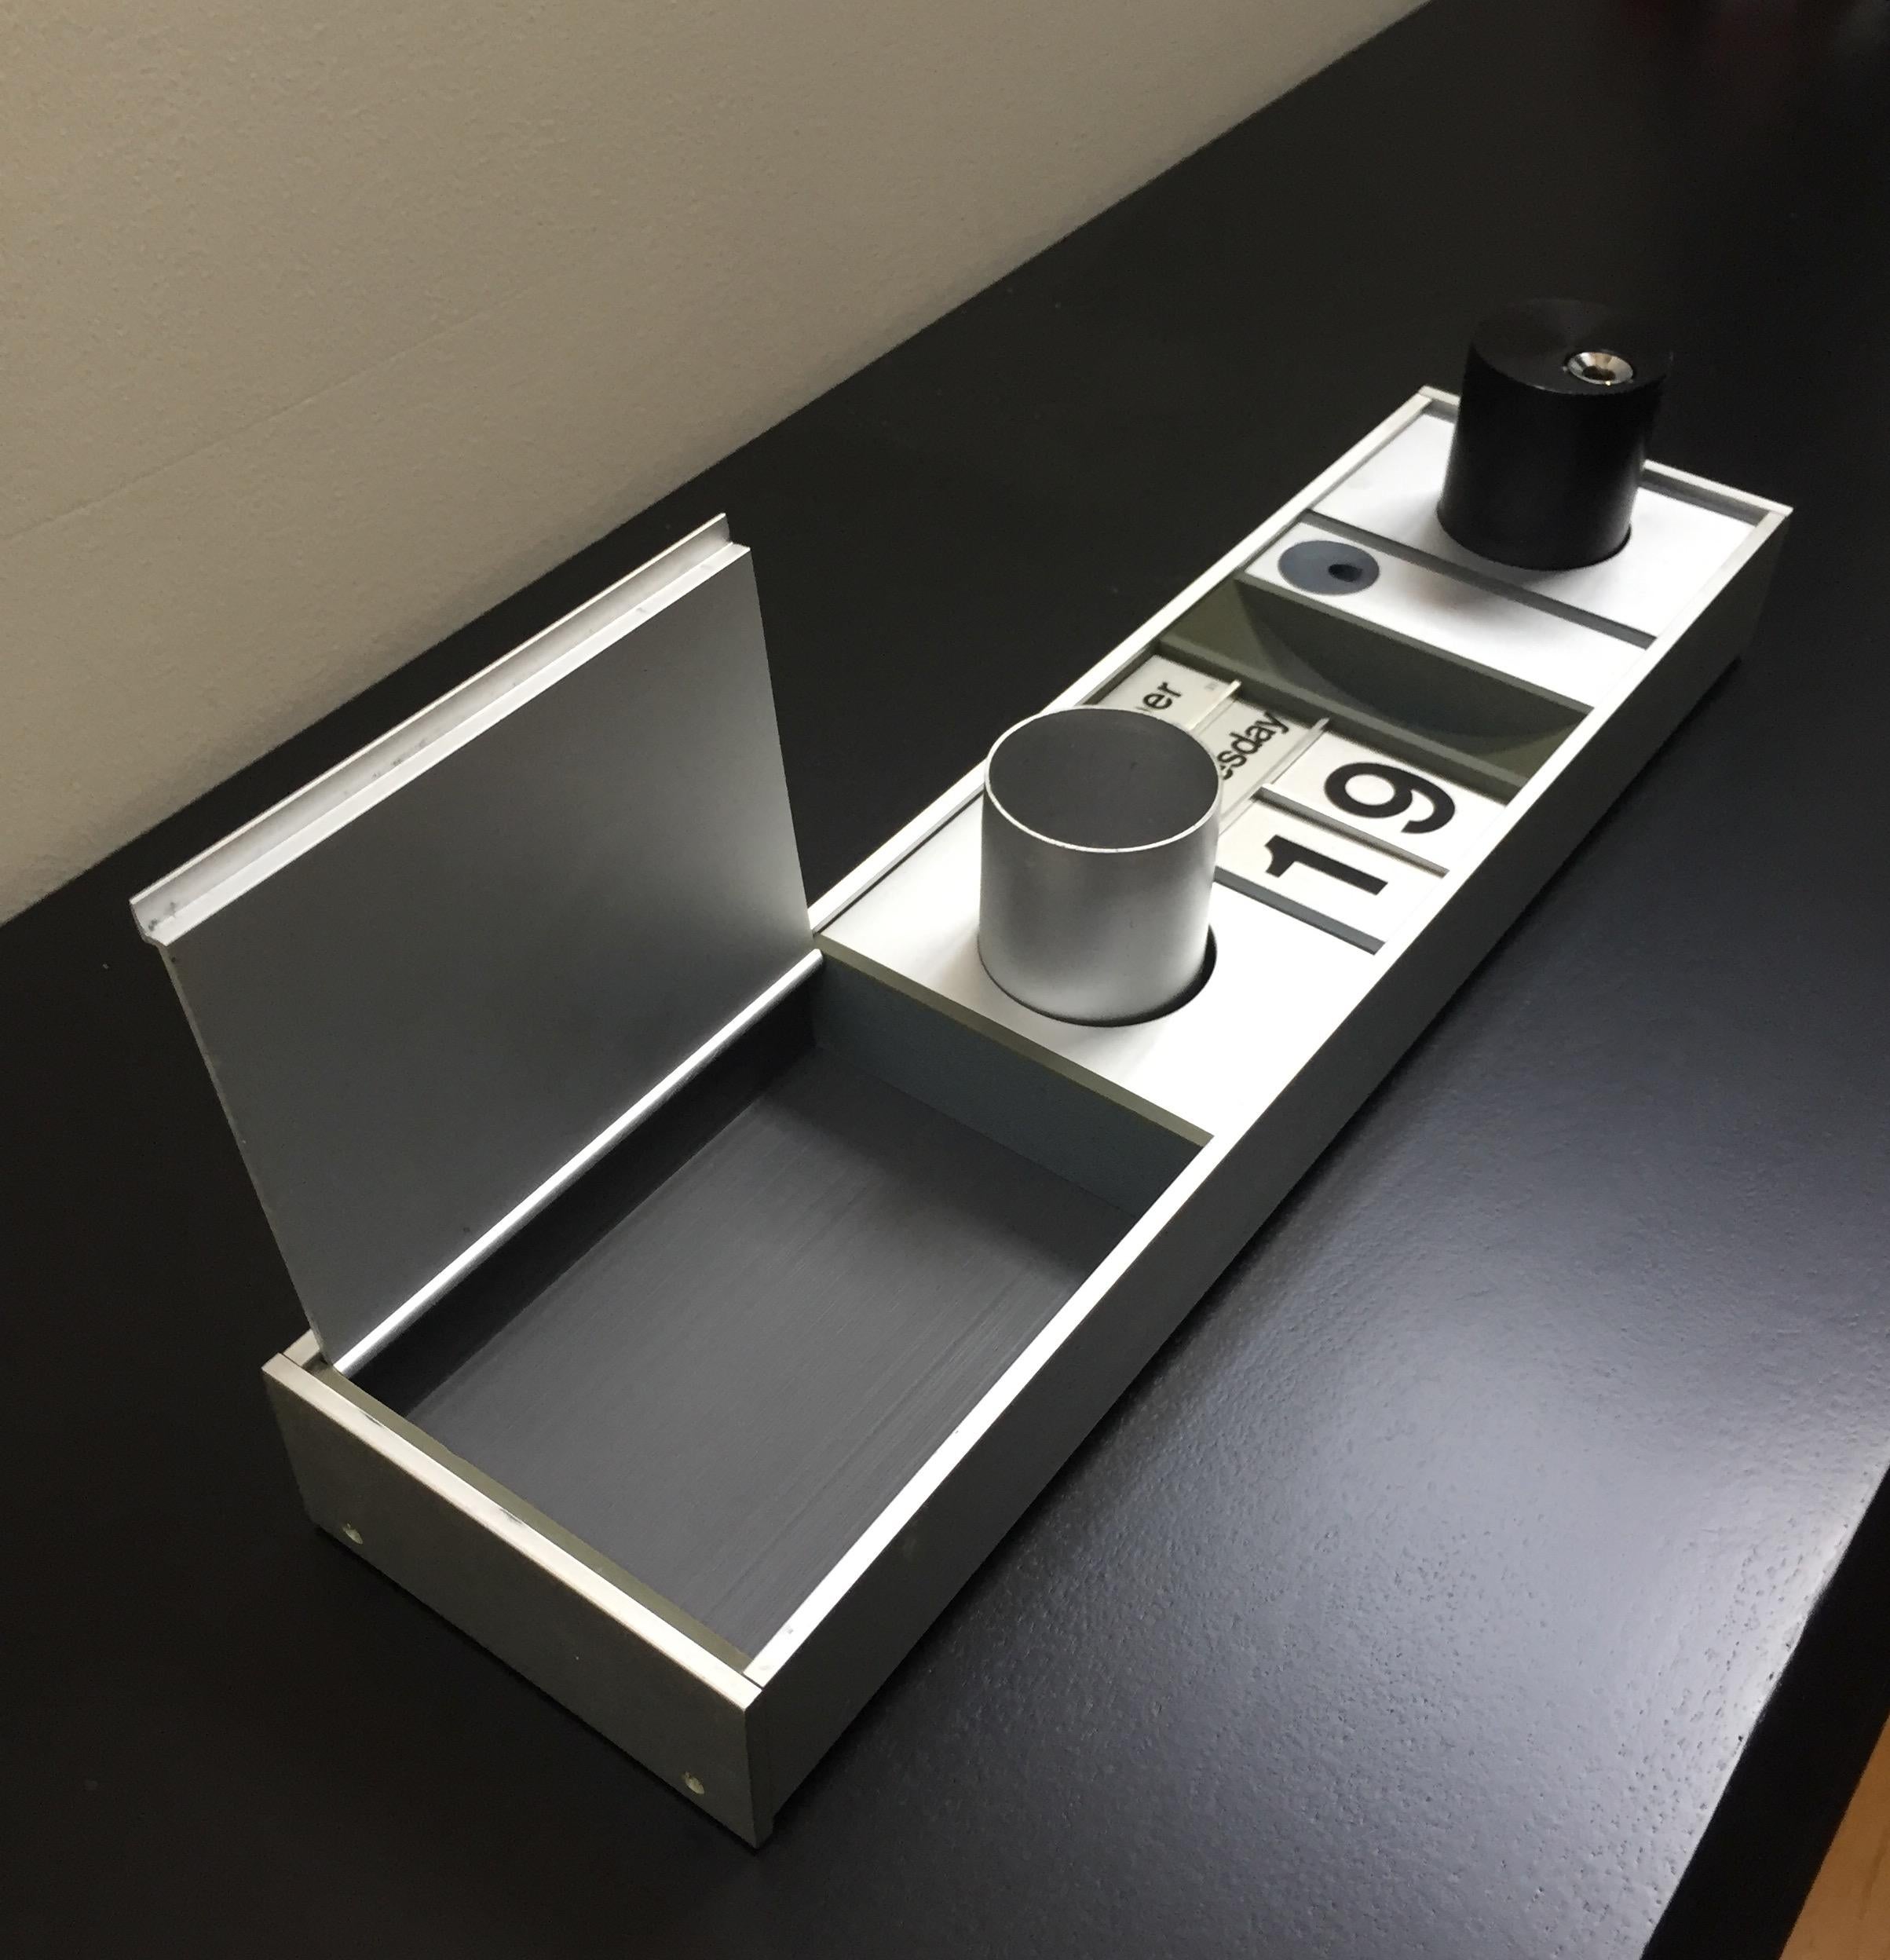 This aluminium desk organizer manufactured by Frank Guille and Frank Height in the 1970s has a covered compartment, calendar, pen cup, Dieter Rams lighter, and space for paper clips and pen holder.